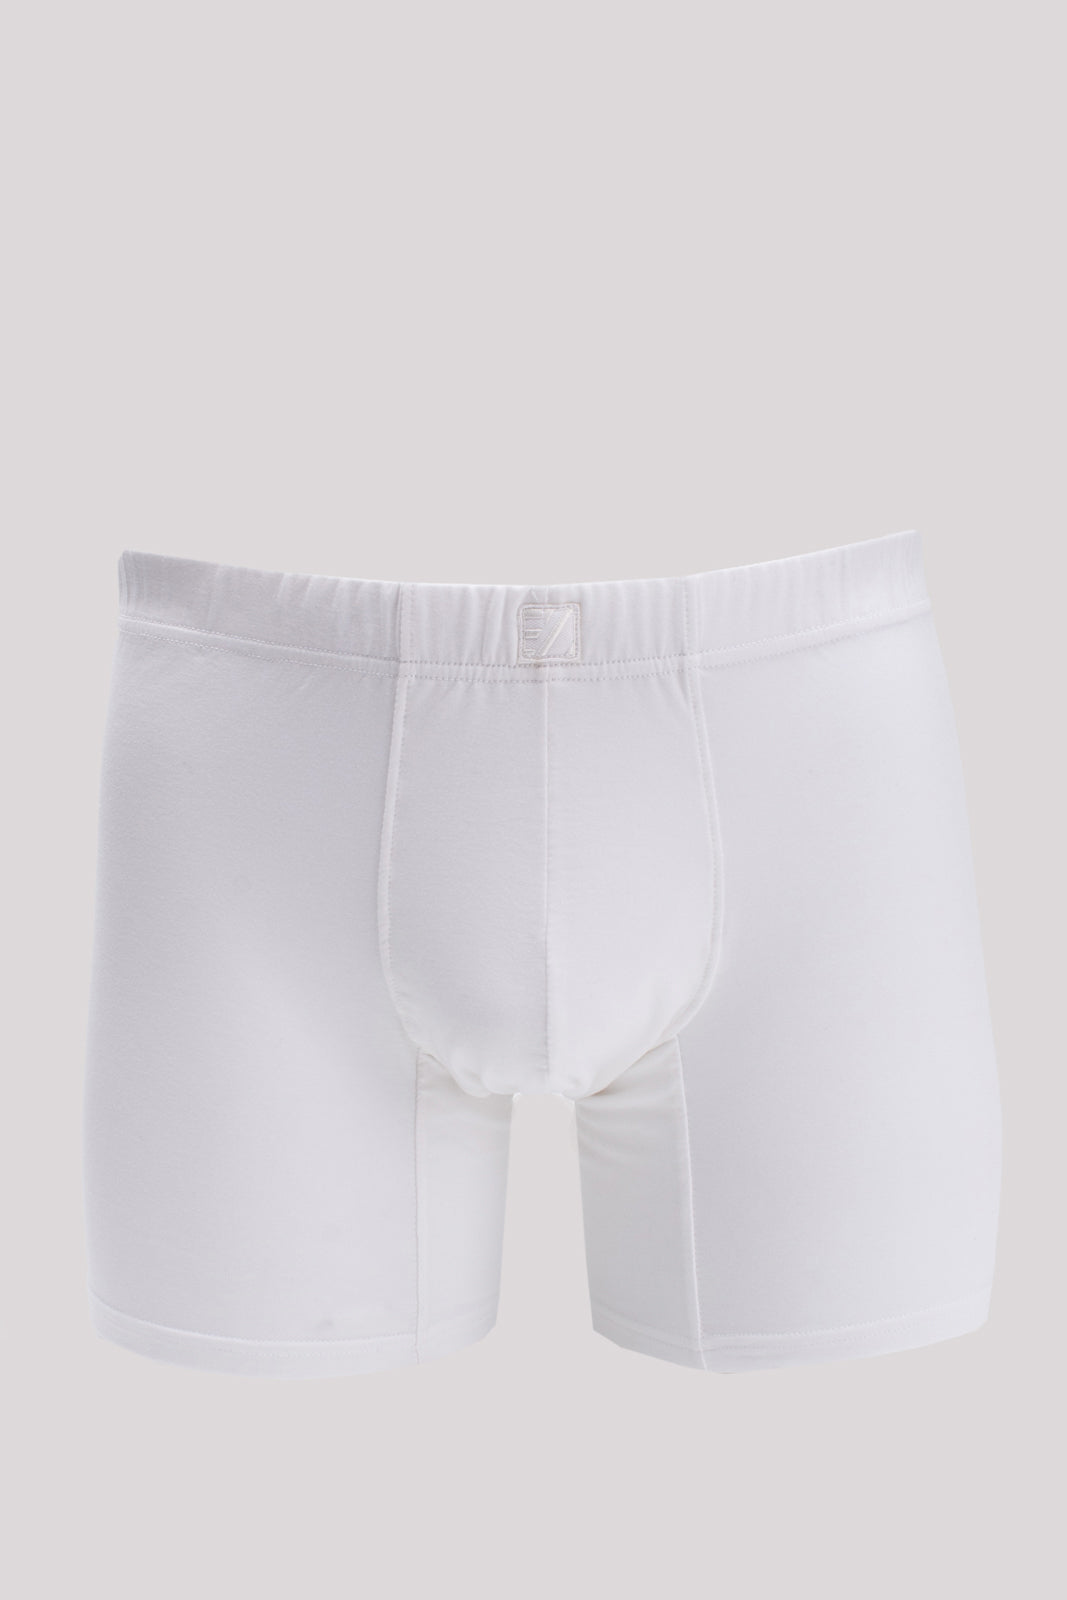 RRP €50 ZEGNA Boxer Trunks US/UK42 EU52 XL White EZ Logo Patch Made in Italy gallery main photo